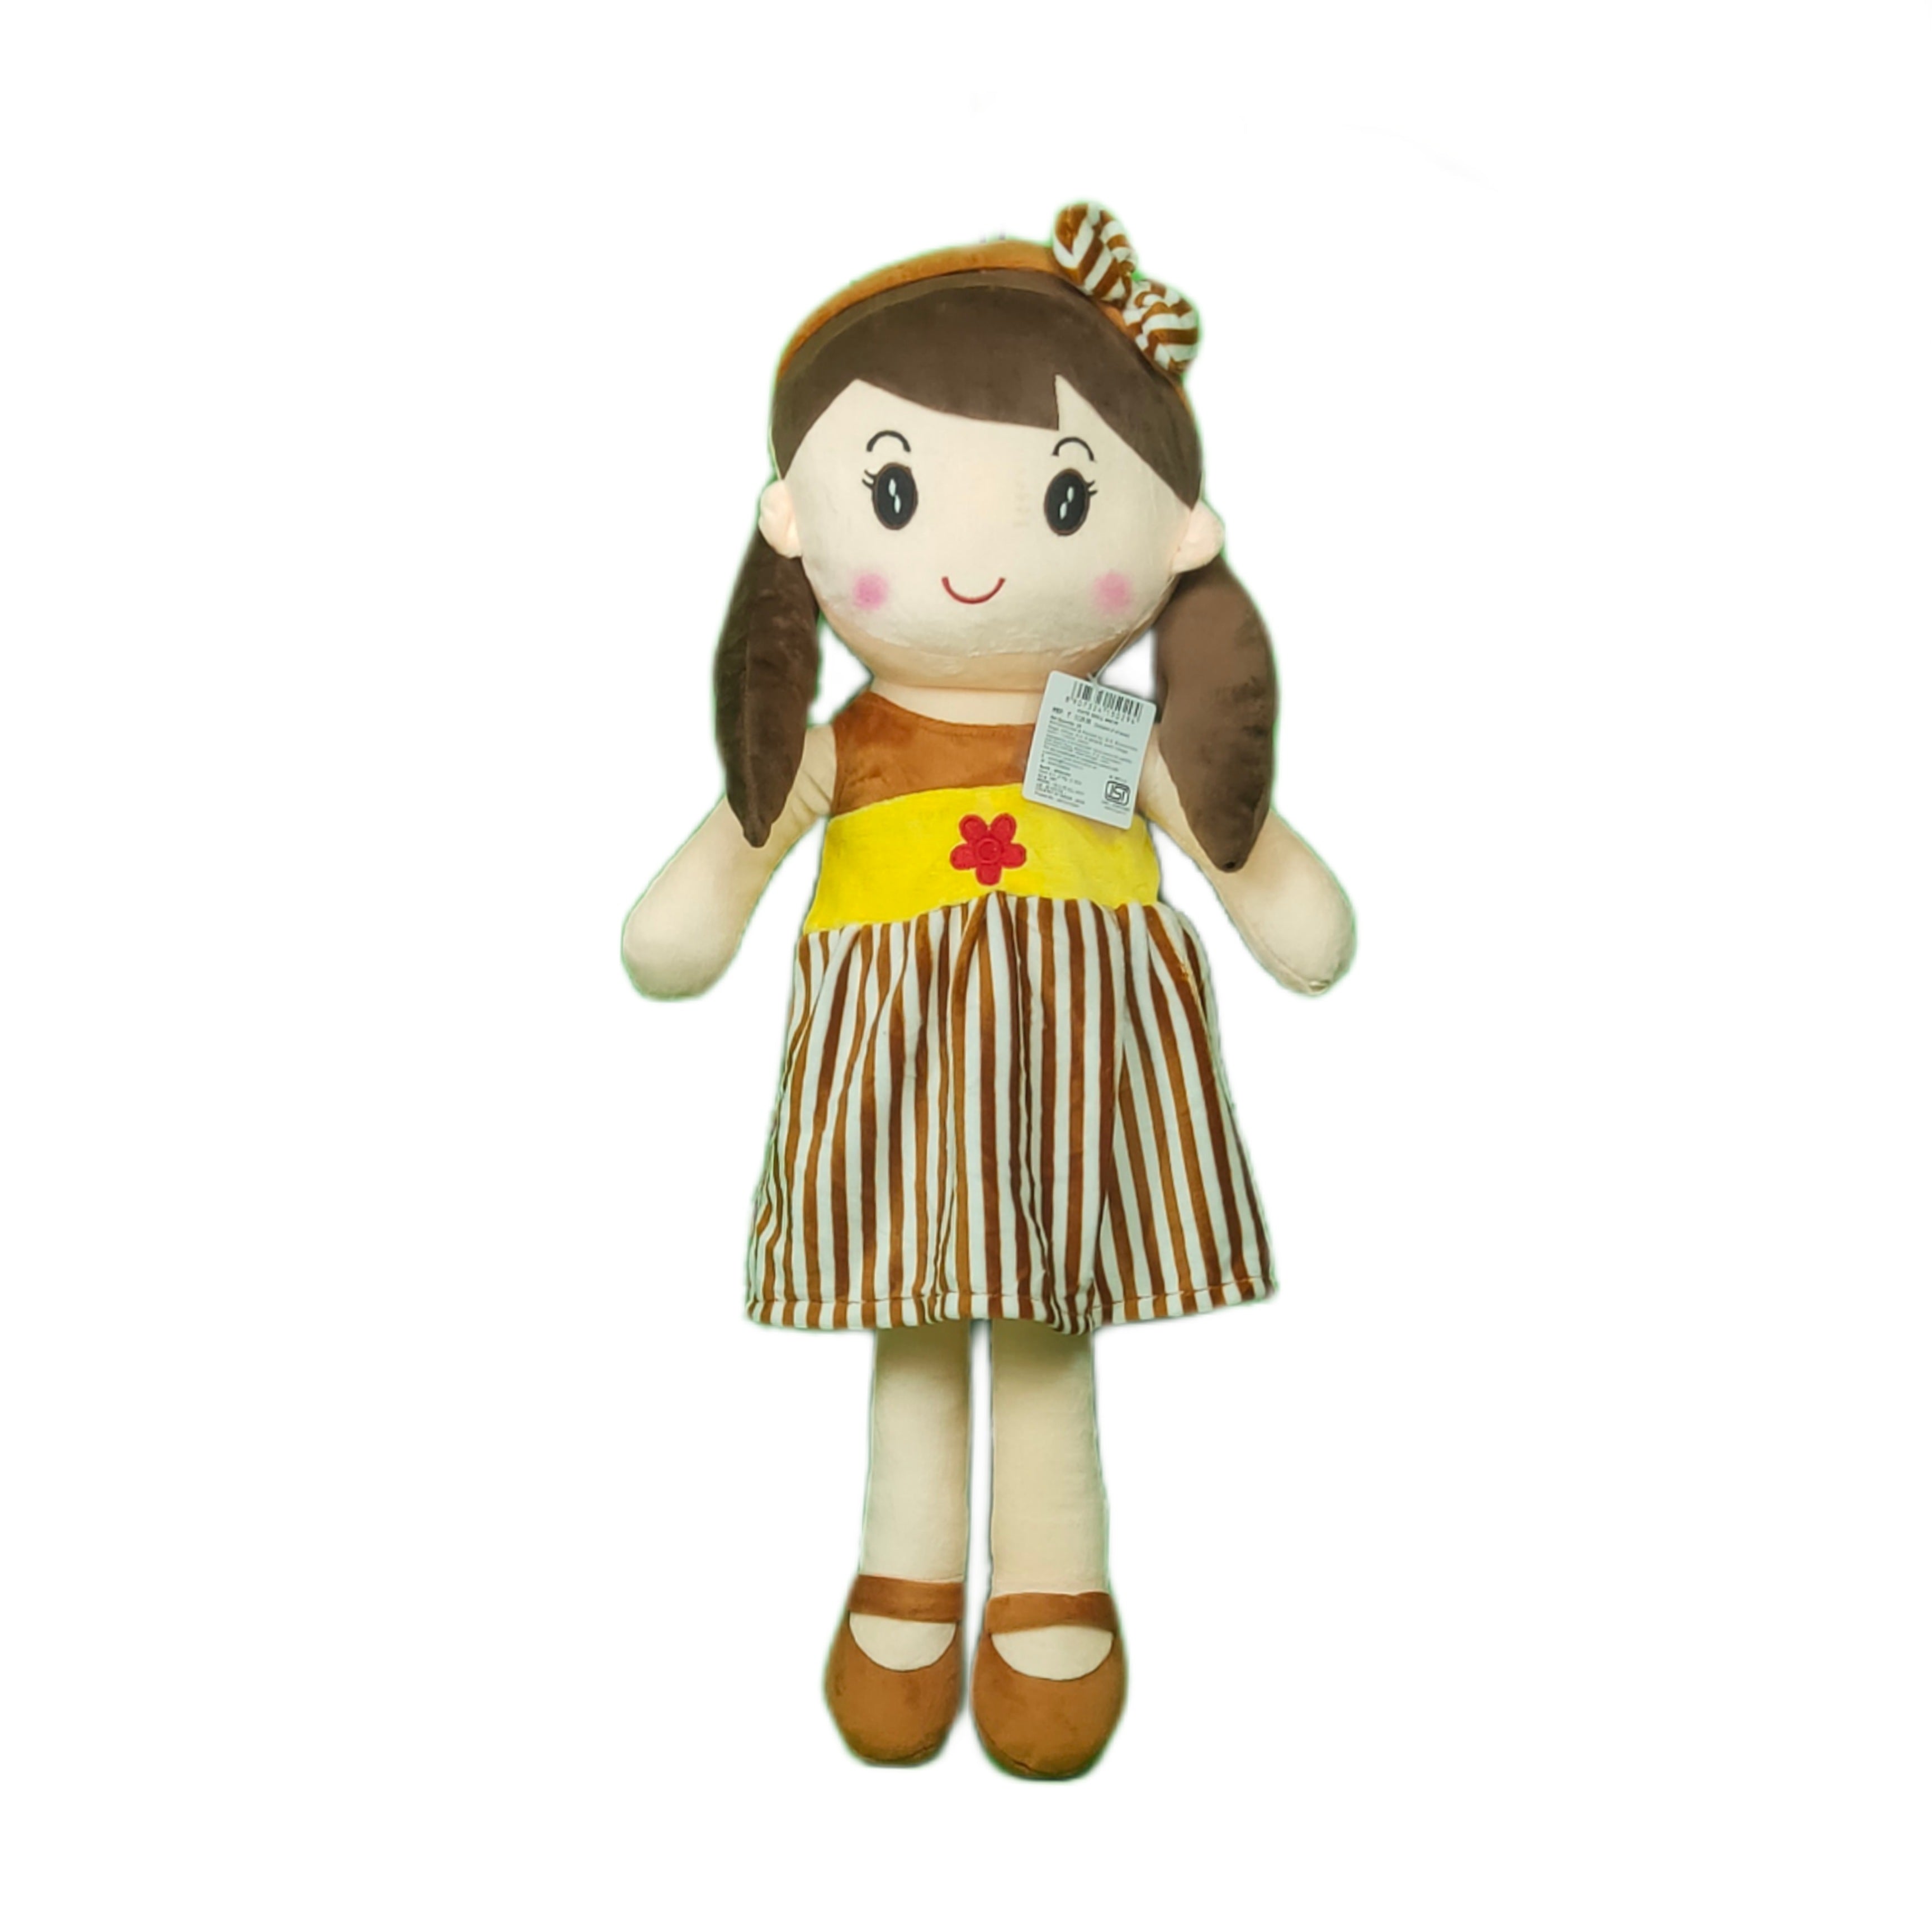 Play Hour Winky Rag Doll Plush Soft Toy Wearing Brown Dress for Ages 3 Years and Up, 60cm